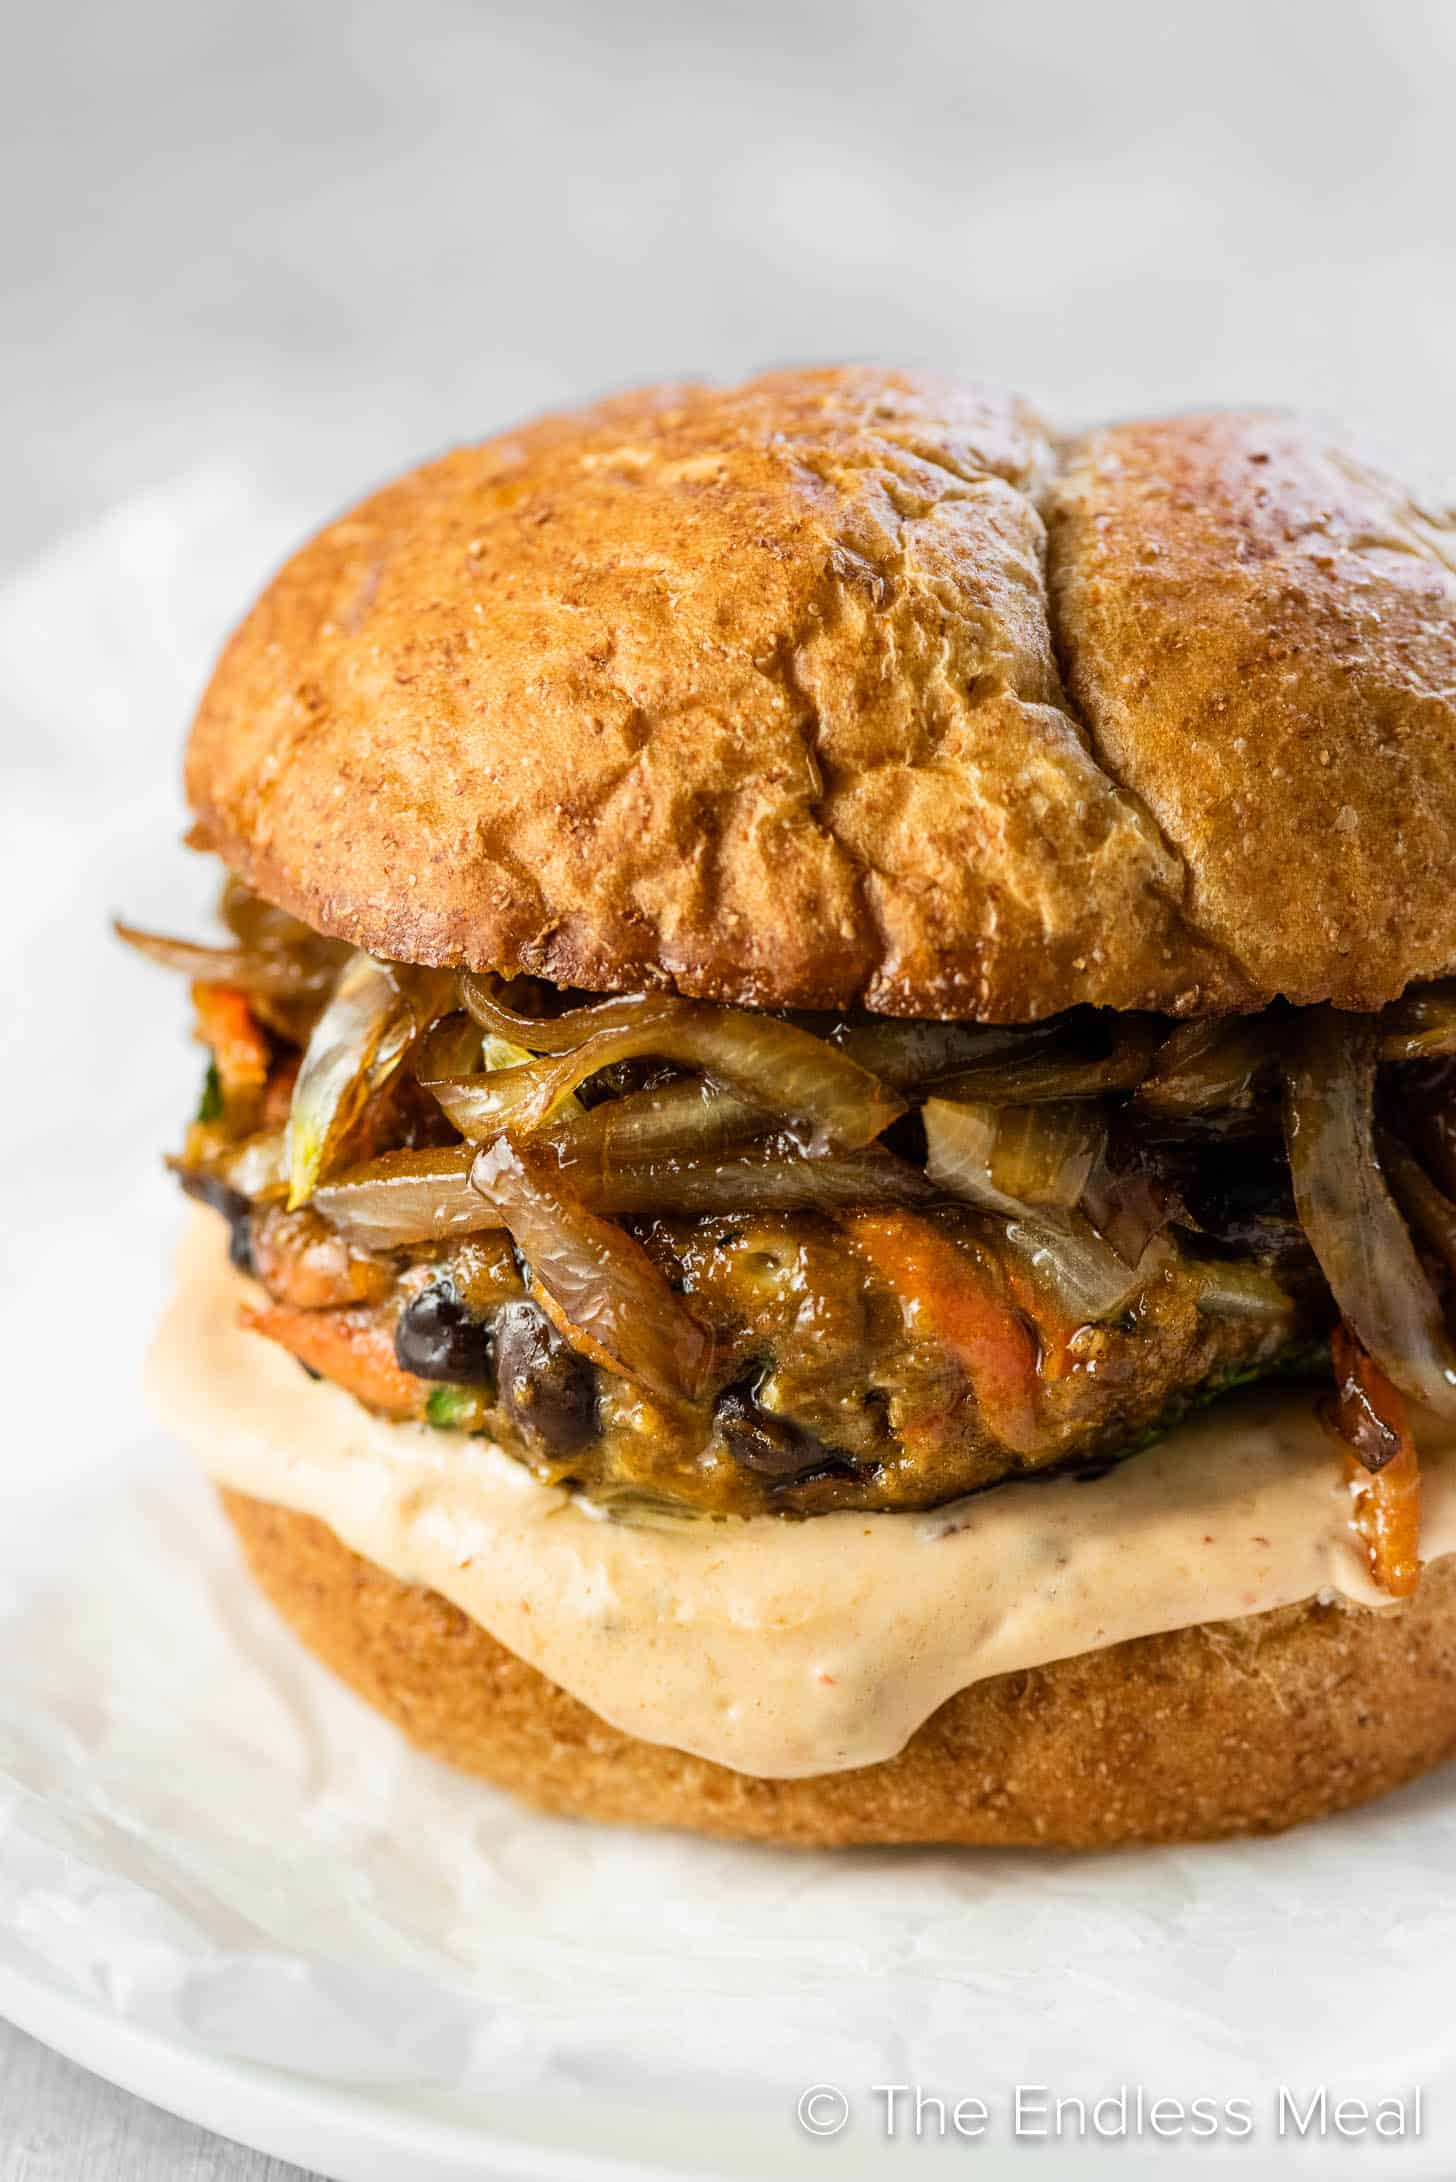 A homemade black bean veggie burger with onions and chipotle mayo